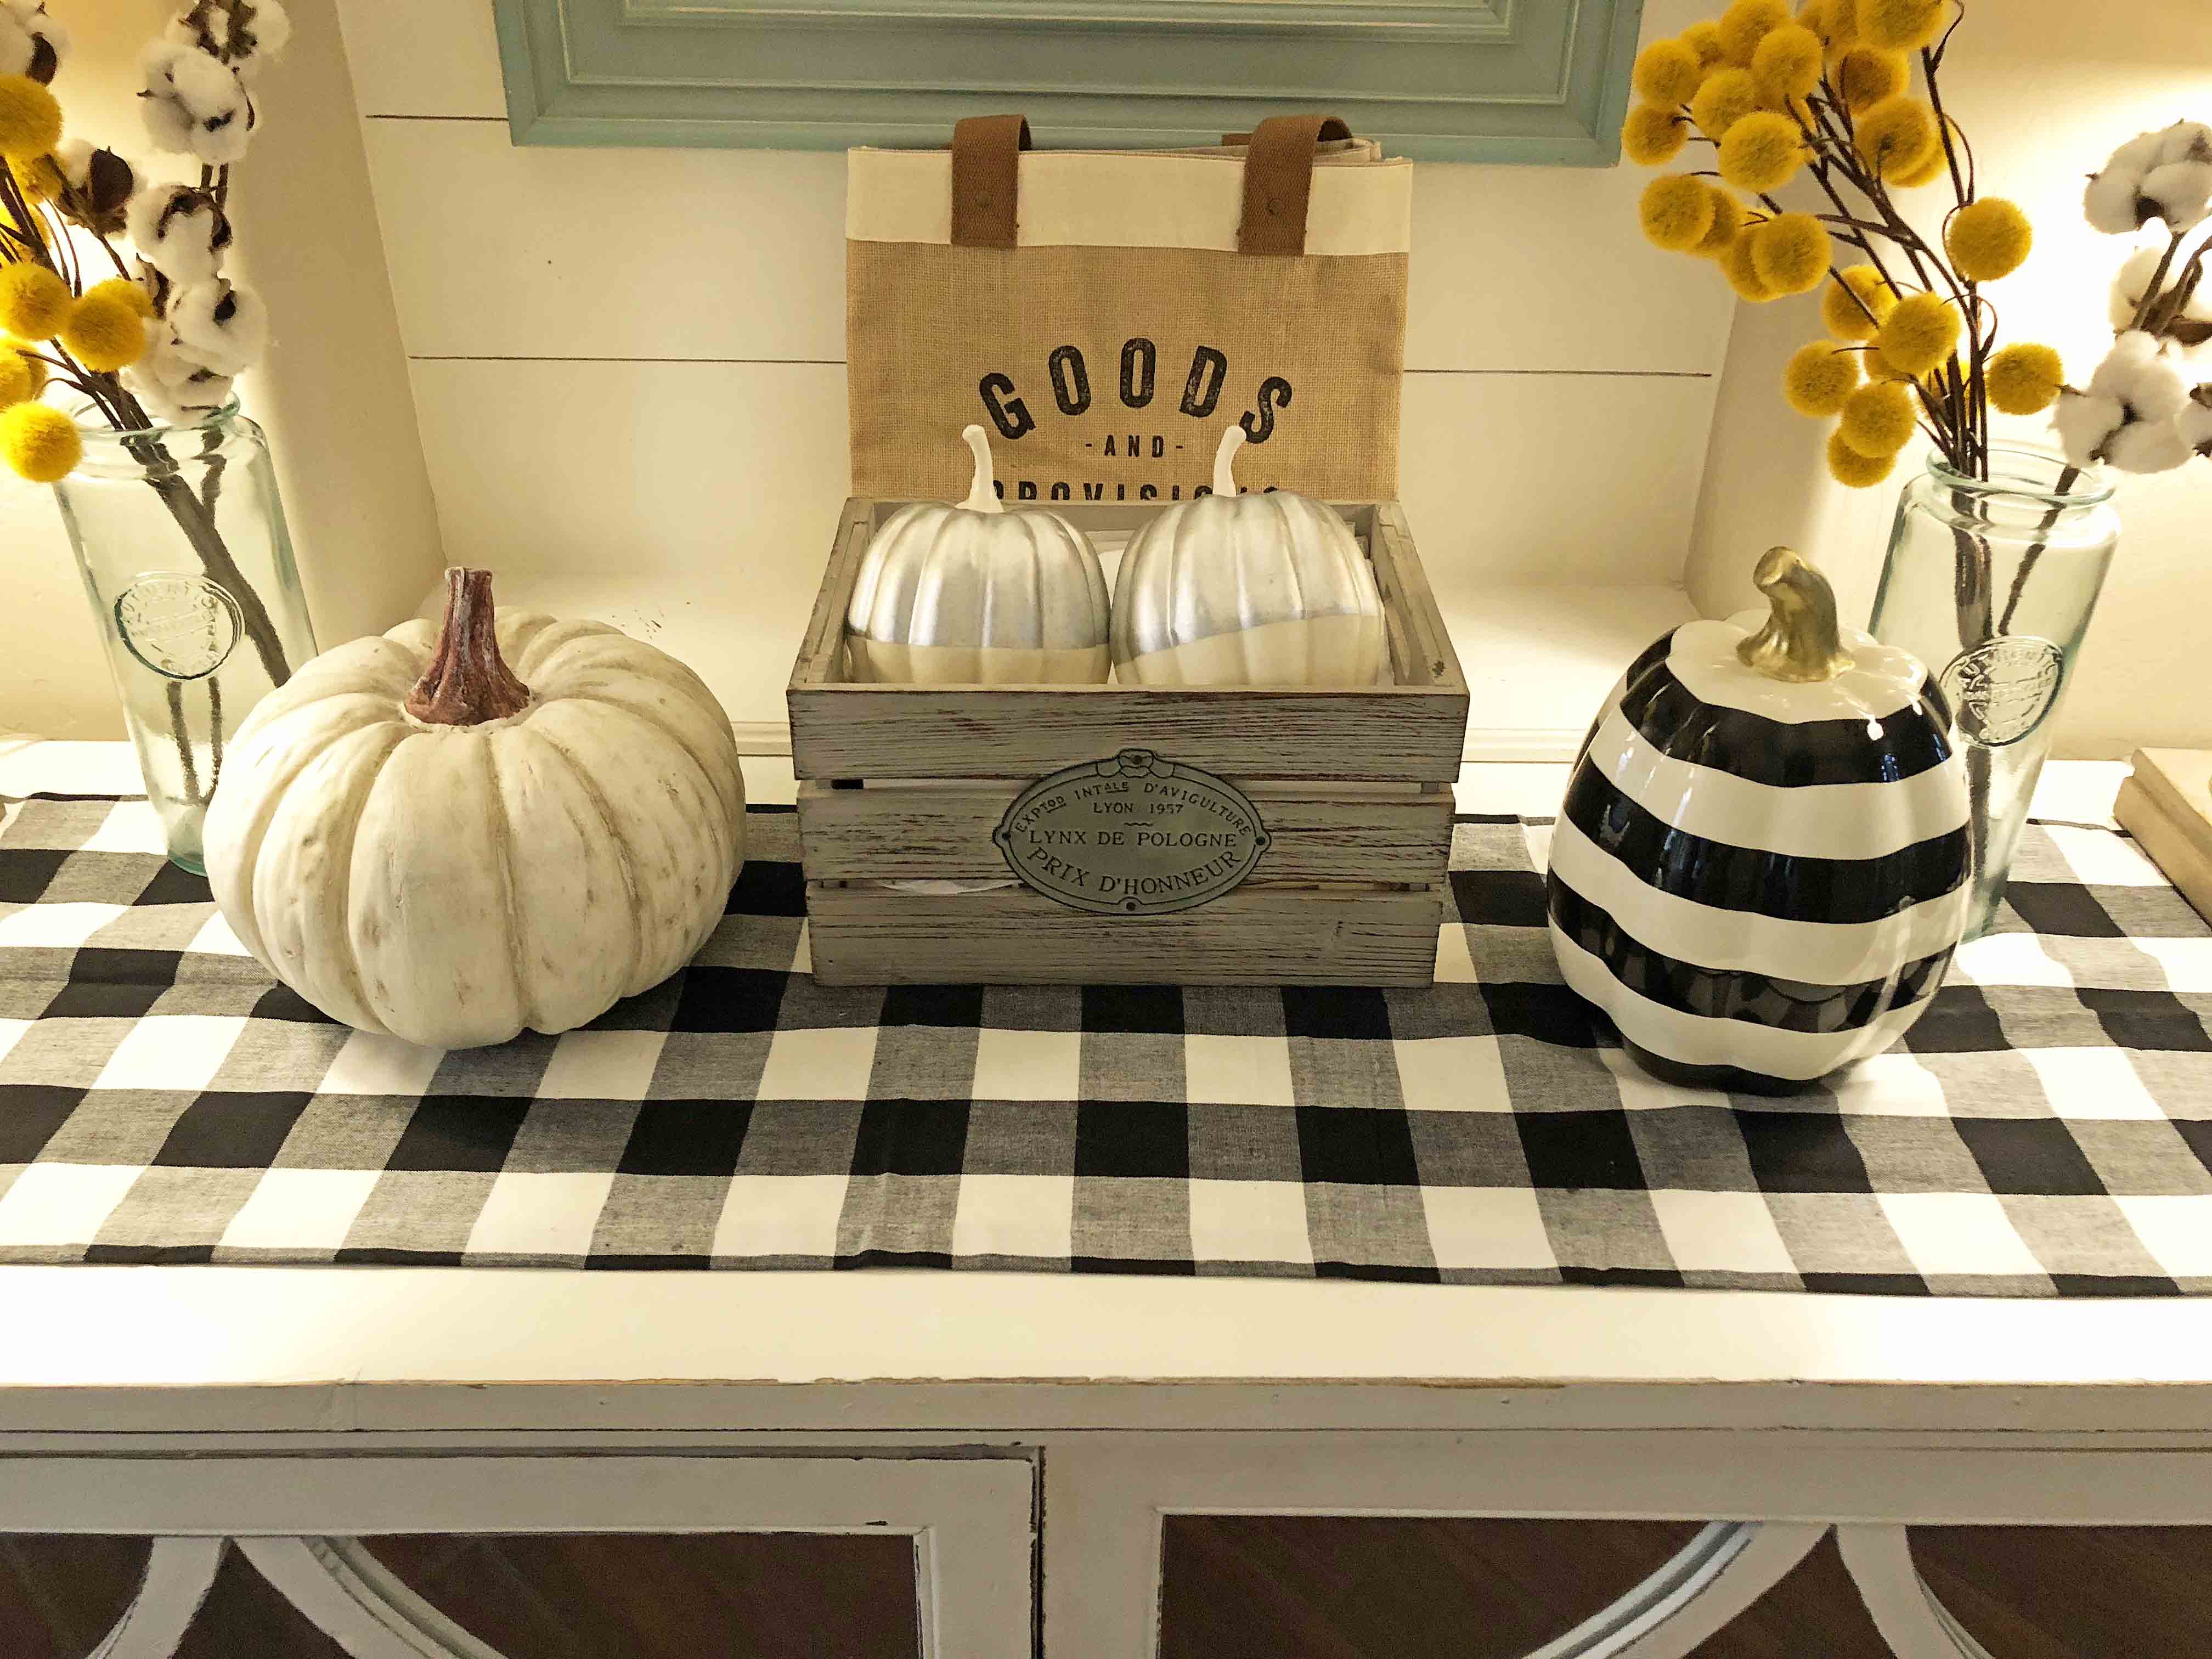 Light and Bright Fall Decor Ideas for the Entry. How to decorate your home for Fall. Black and White Checkered Buffalo Plaid Table Runner. White Pumpkins and Black and White Striped Pumpkins. www.modernhoney.com #buffaloplaidrunner #buffaloplaid #buffalocheck #falldecor #falldecorideas #falldecorations #whiteFalldecor